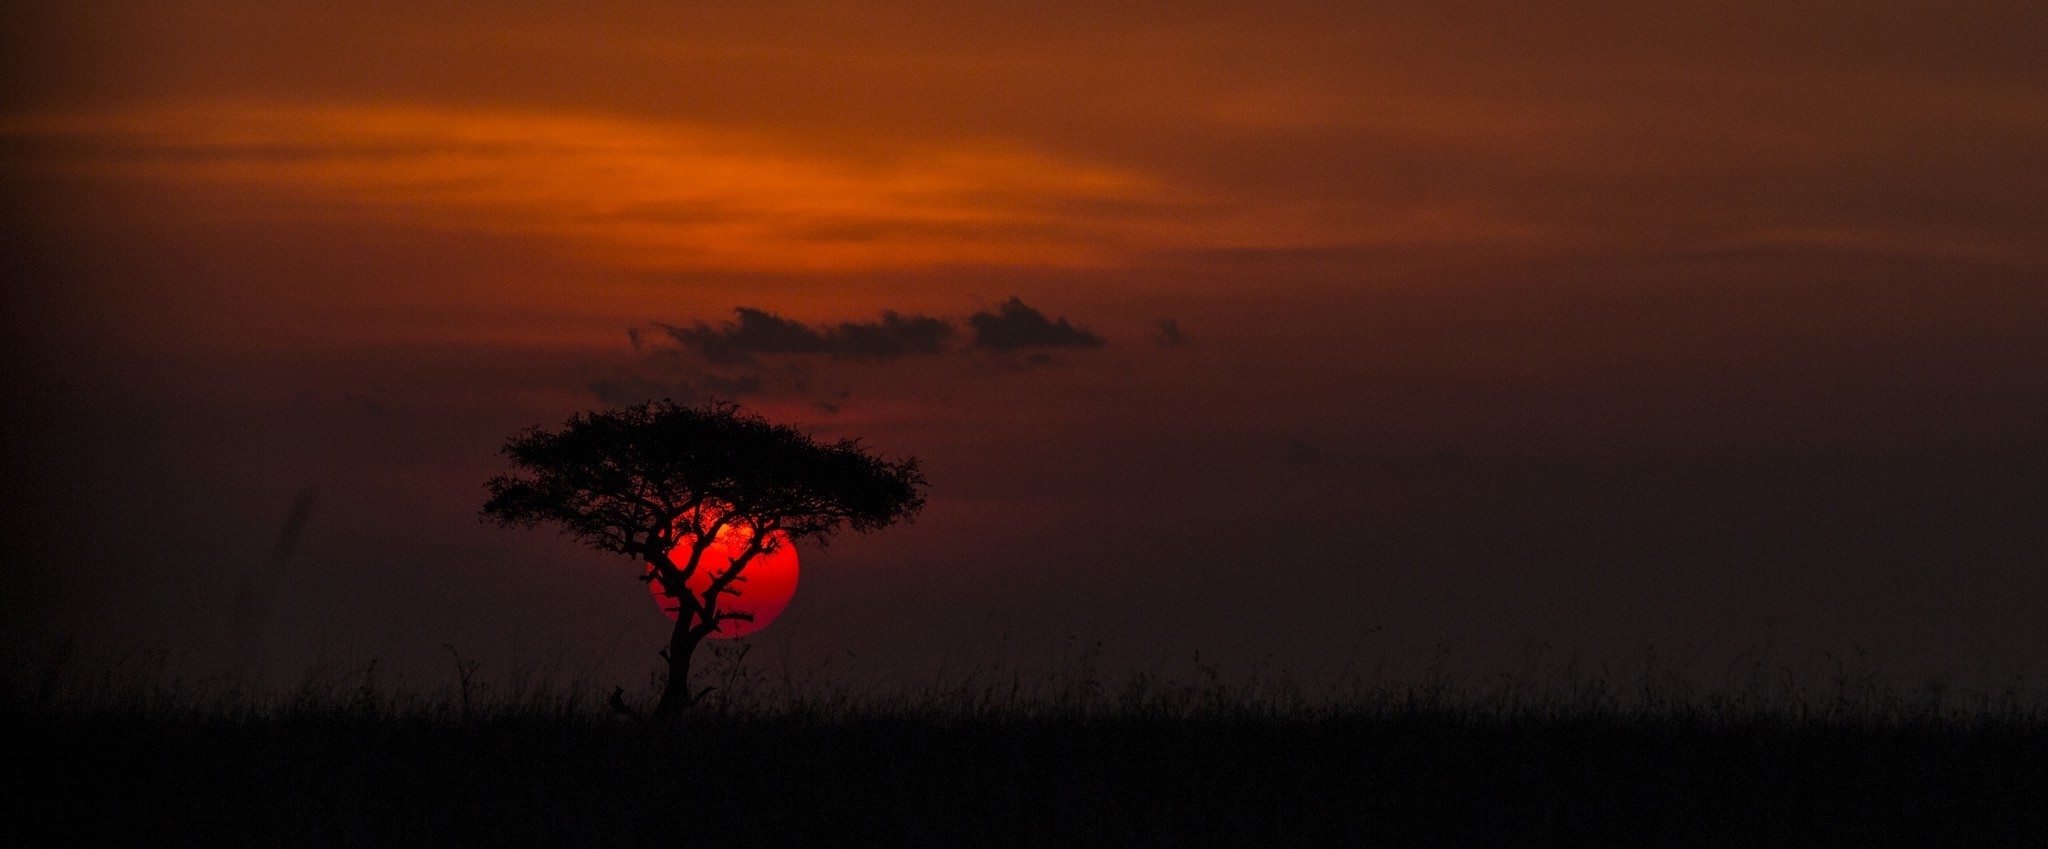 nature, Photography, Landscape, Sunset, Trees, Clouds, Red, Grass, Africa Wallpaper